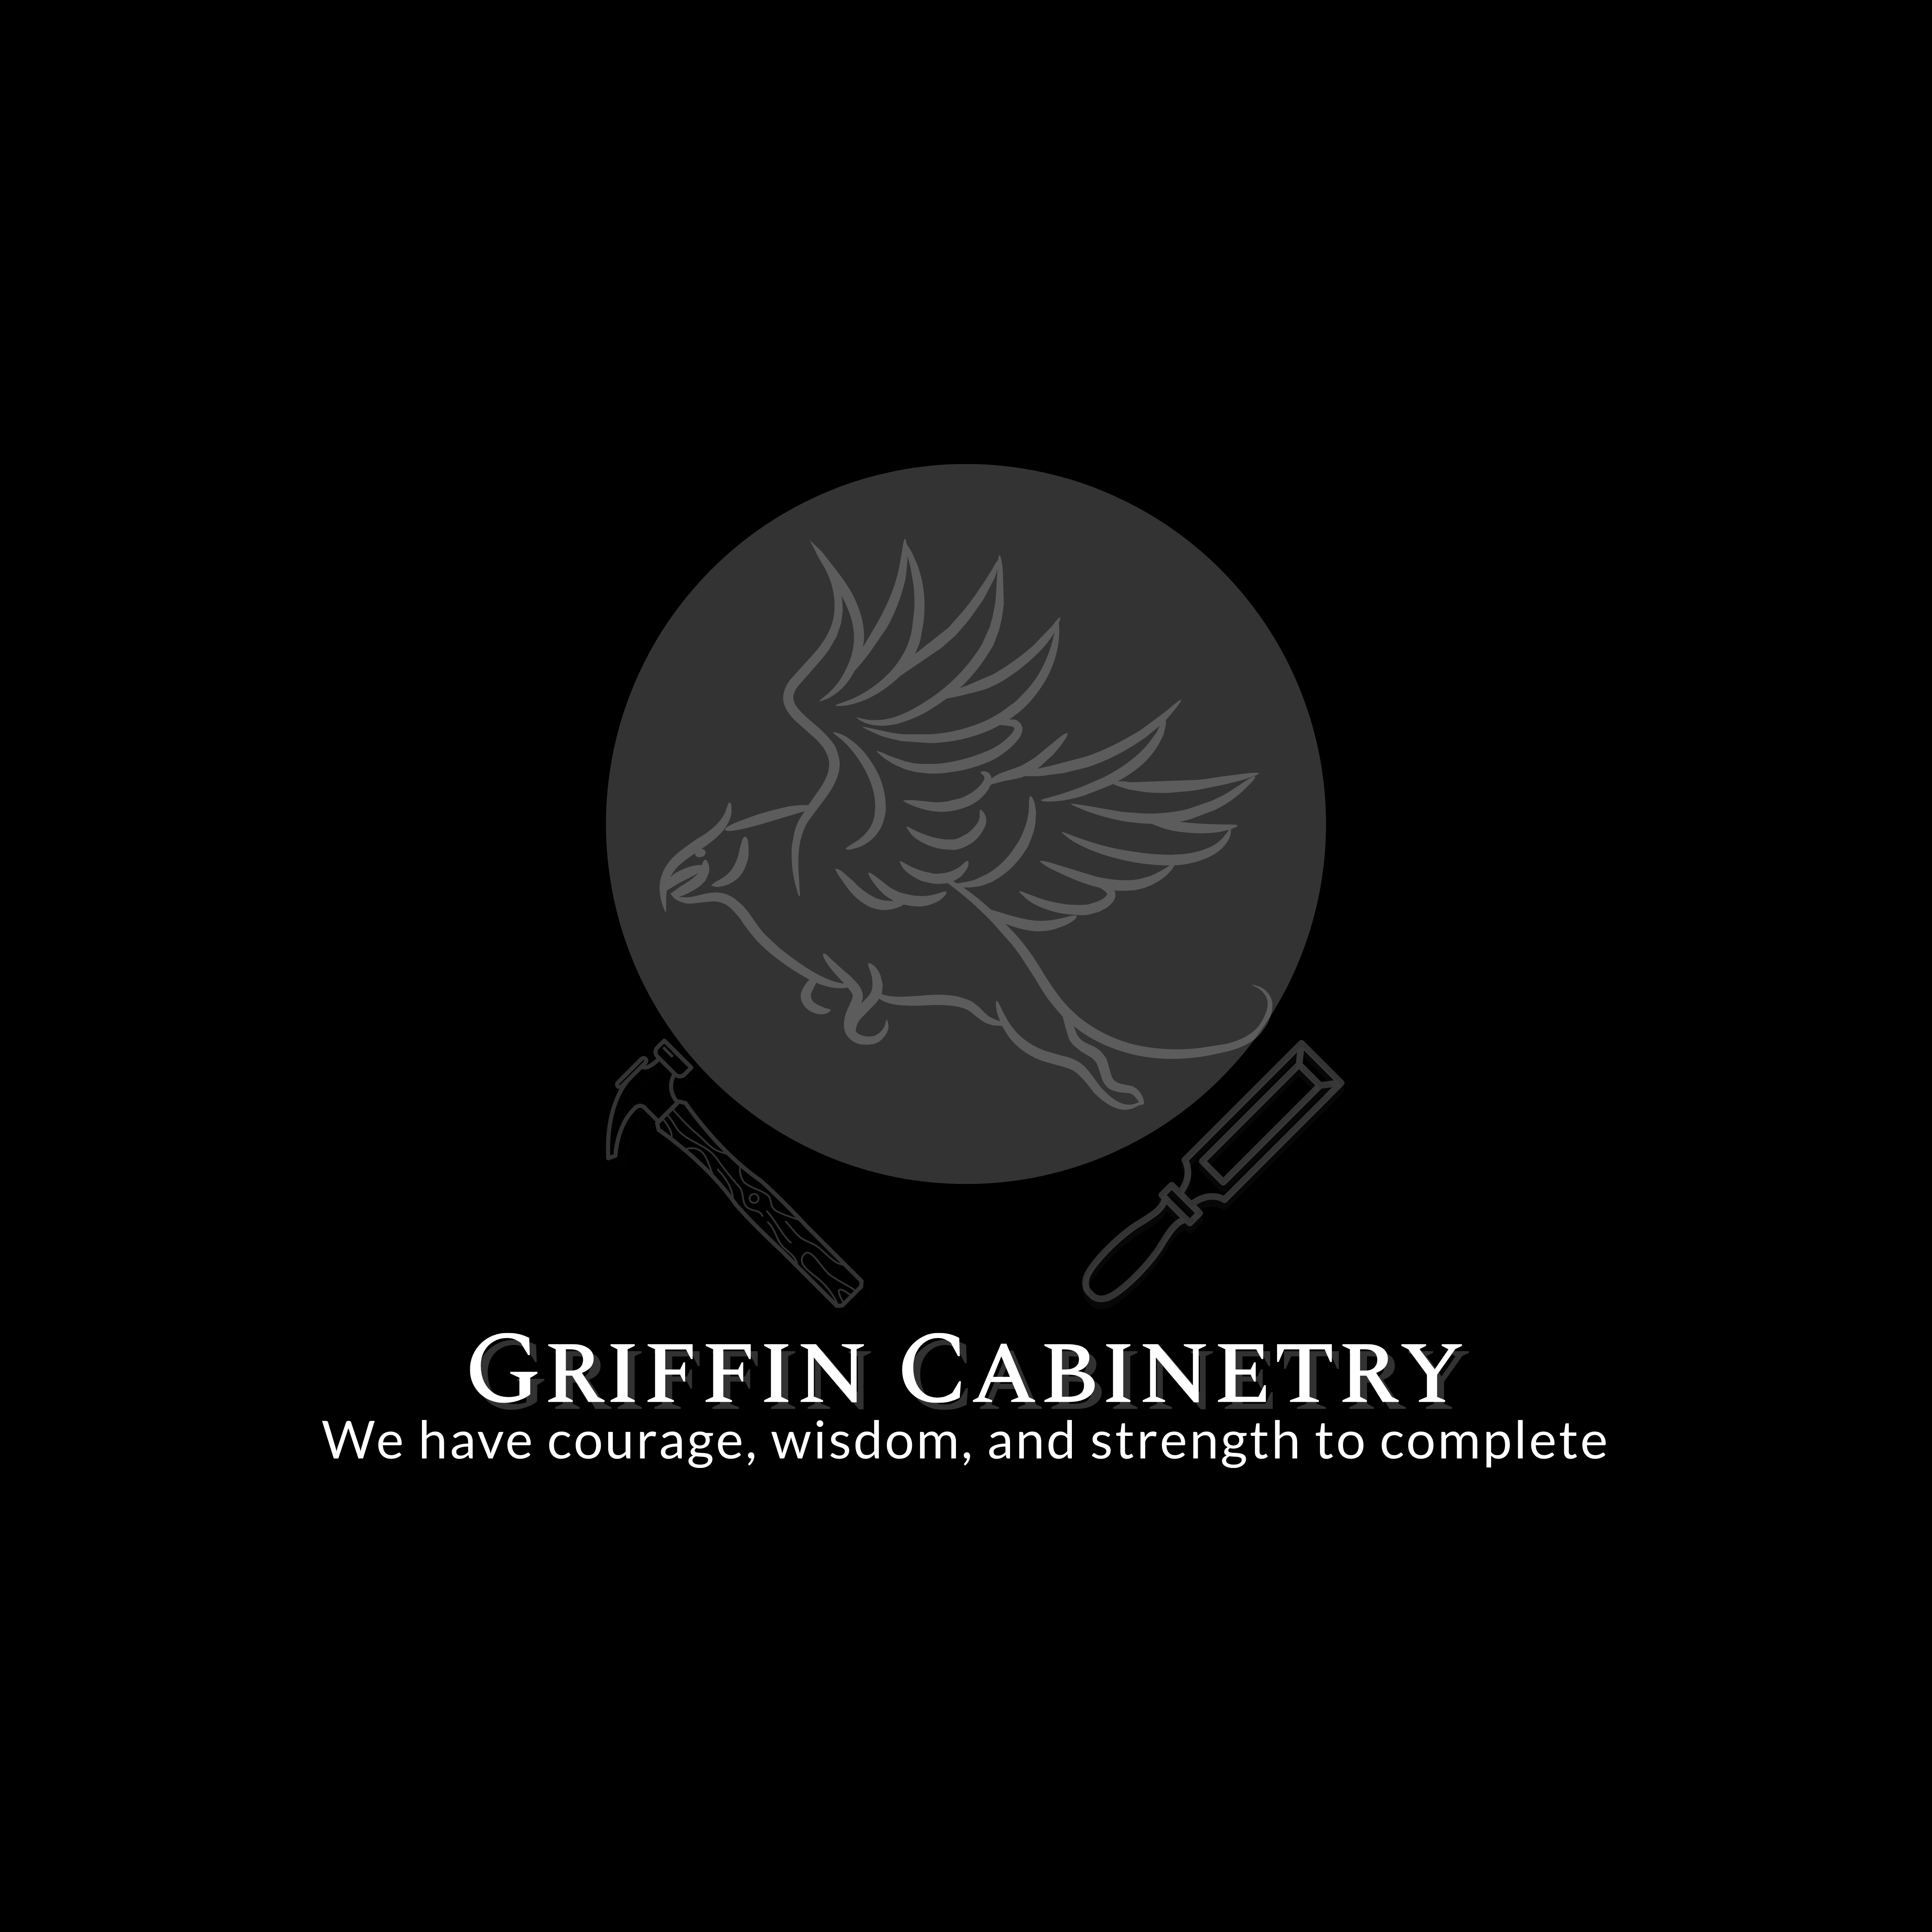 Griffin Cabinetry Logo